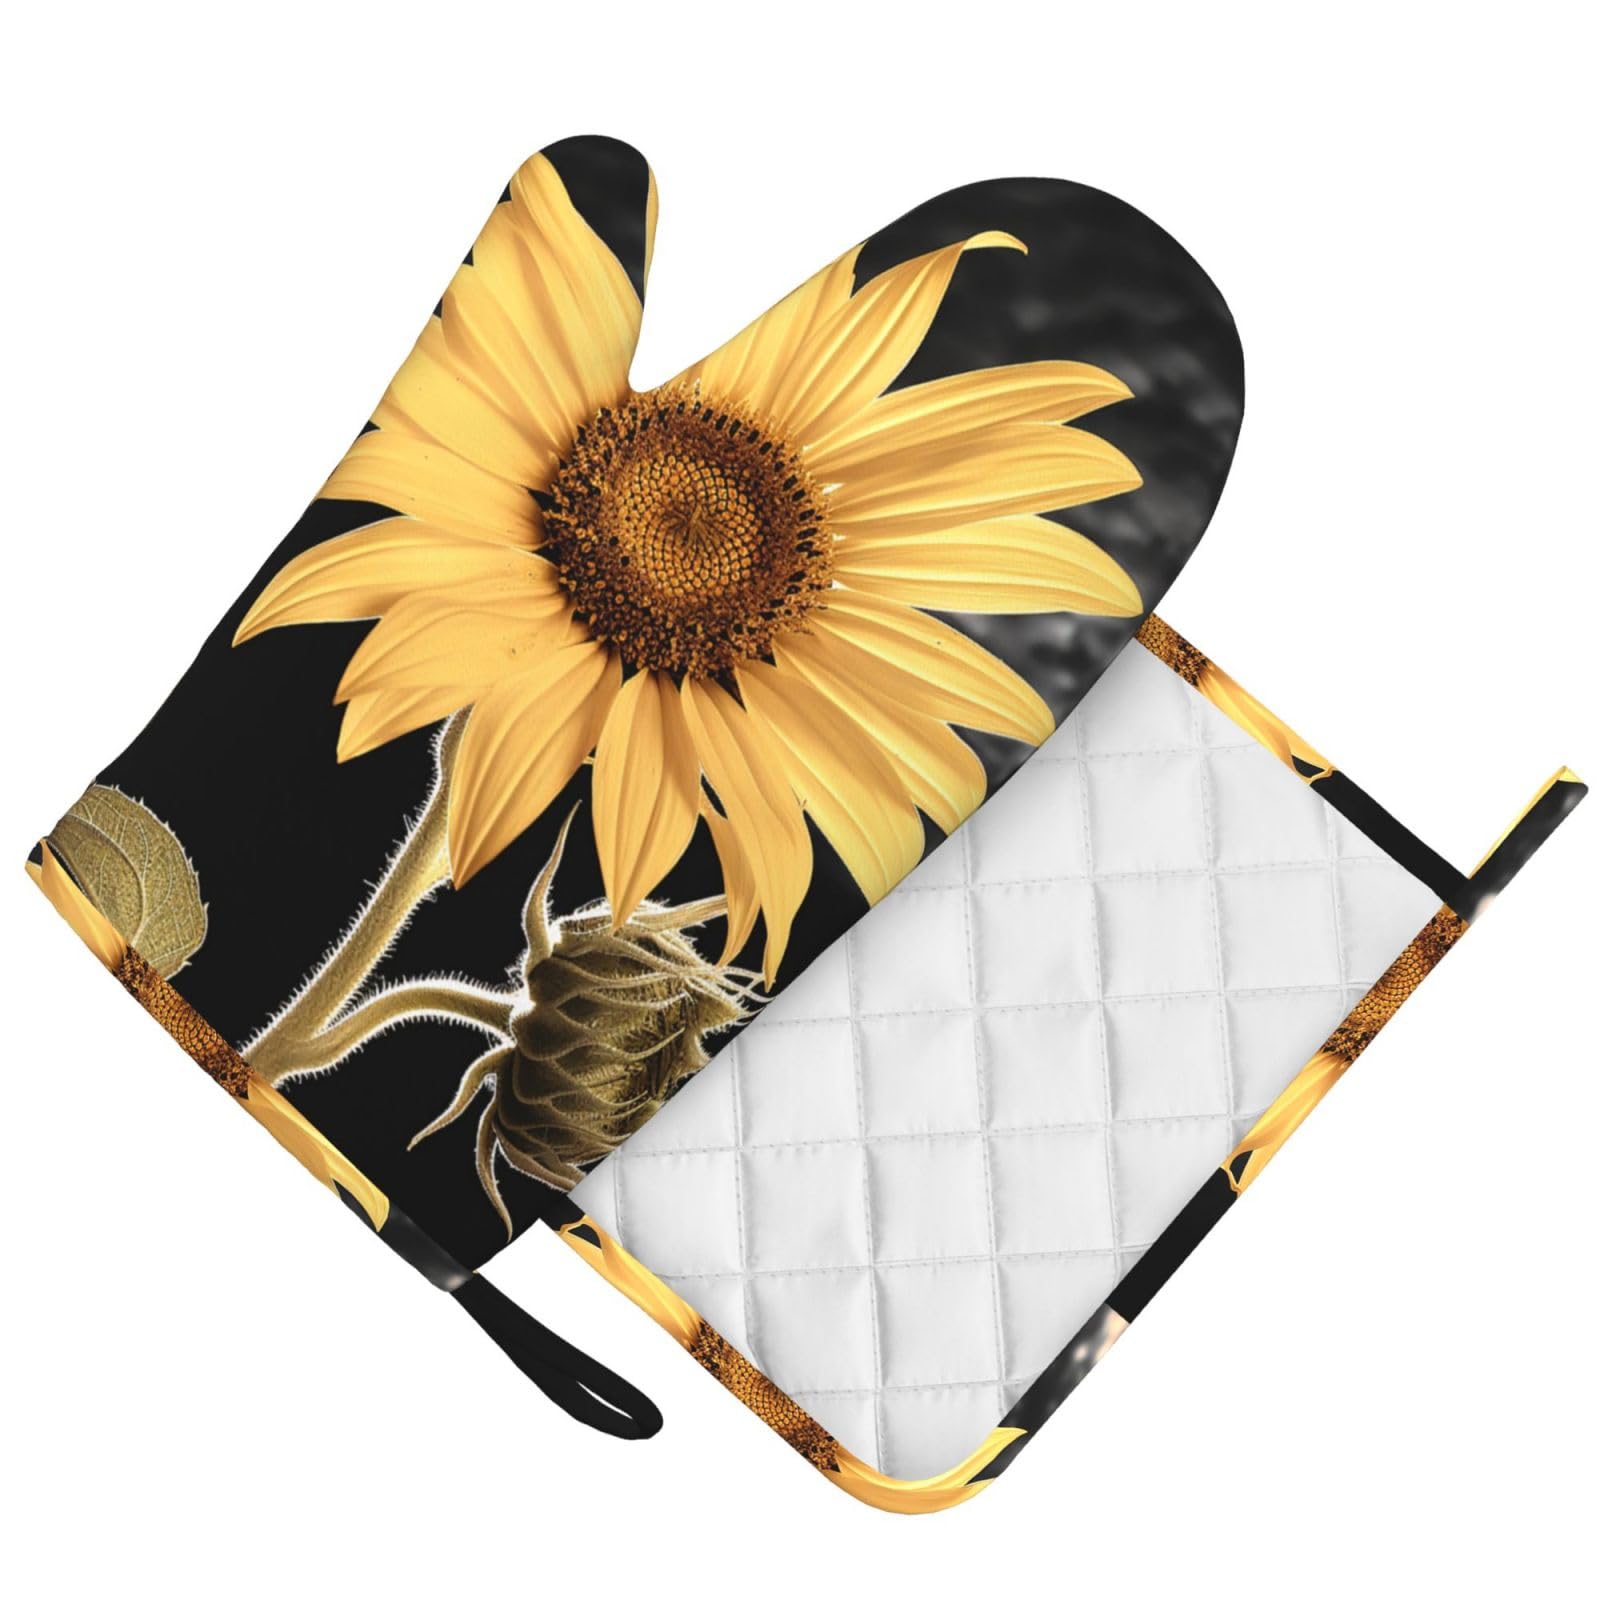 Sunflower Printed Oven Mitts and Pot Holders Sets Heat Resistant Kitchen Oven Gloves Potholders Set Extra Long Non-Slip Silicone Gloves for Cooking Baking BBQ